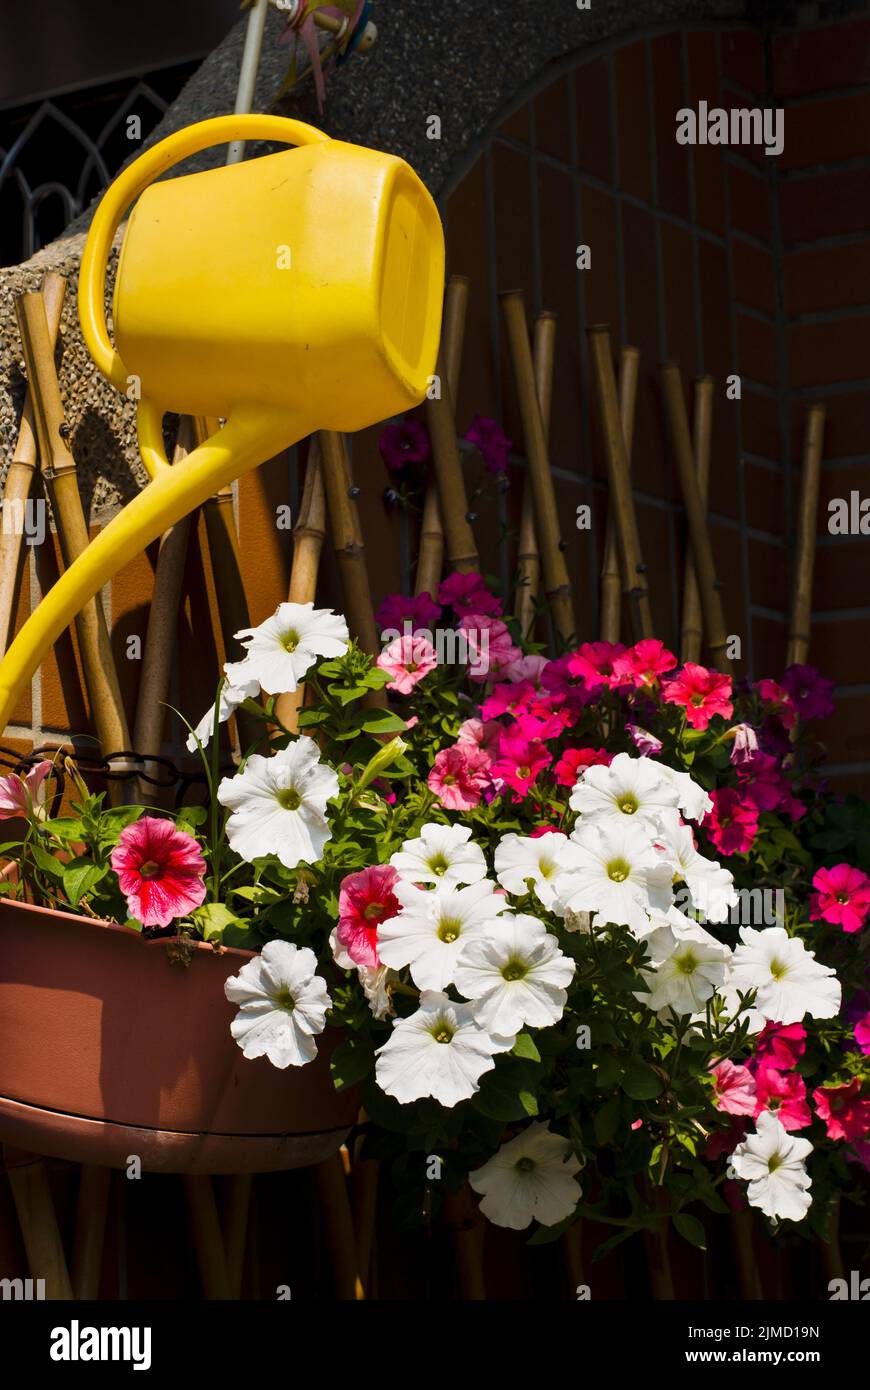 Colorful flower plant and watering can hanging on bamboo fence Stock Photo